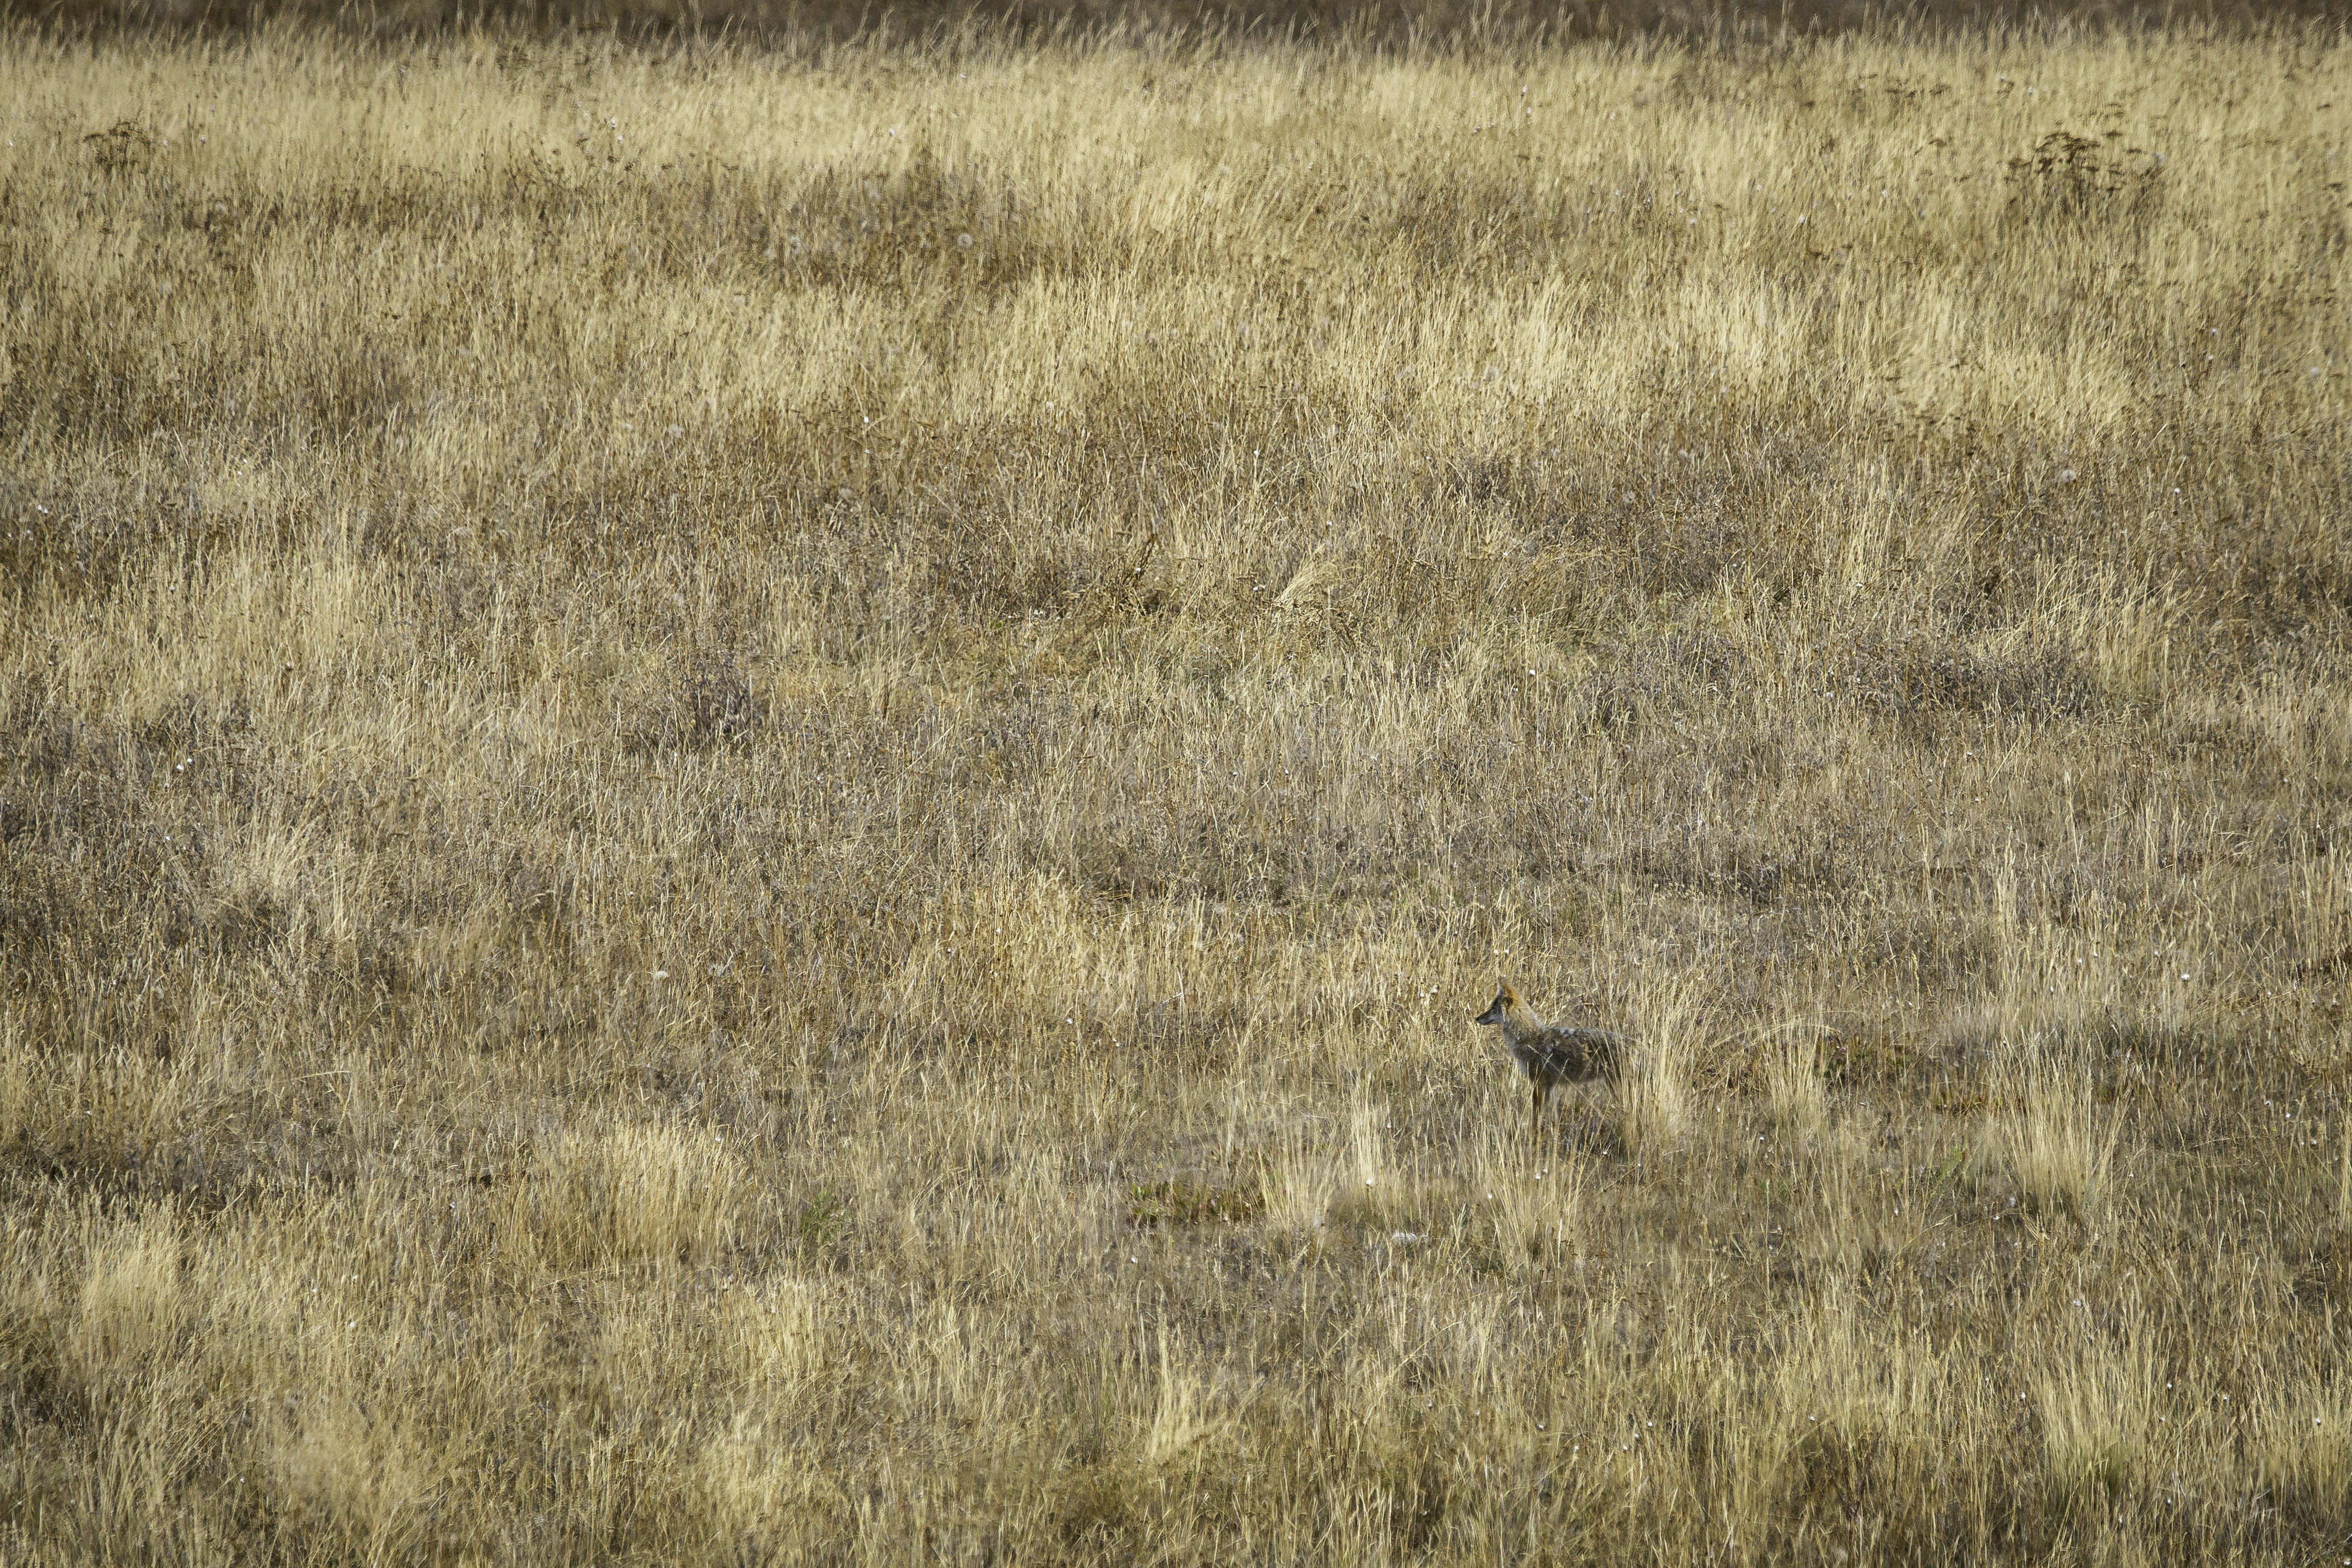 Coyote in the grass.